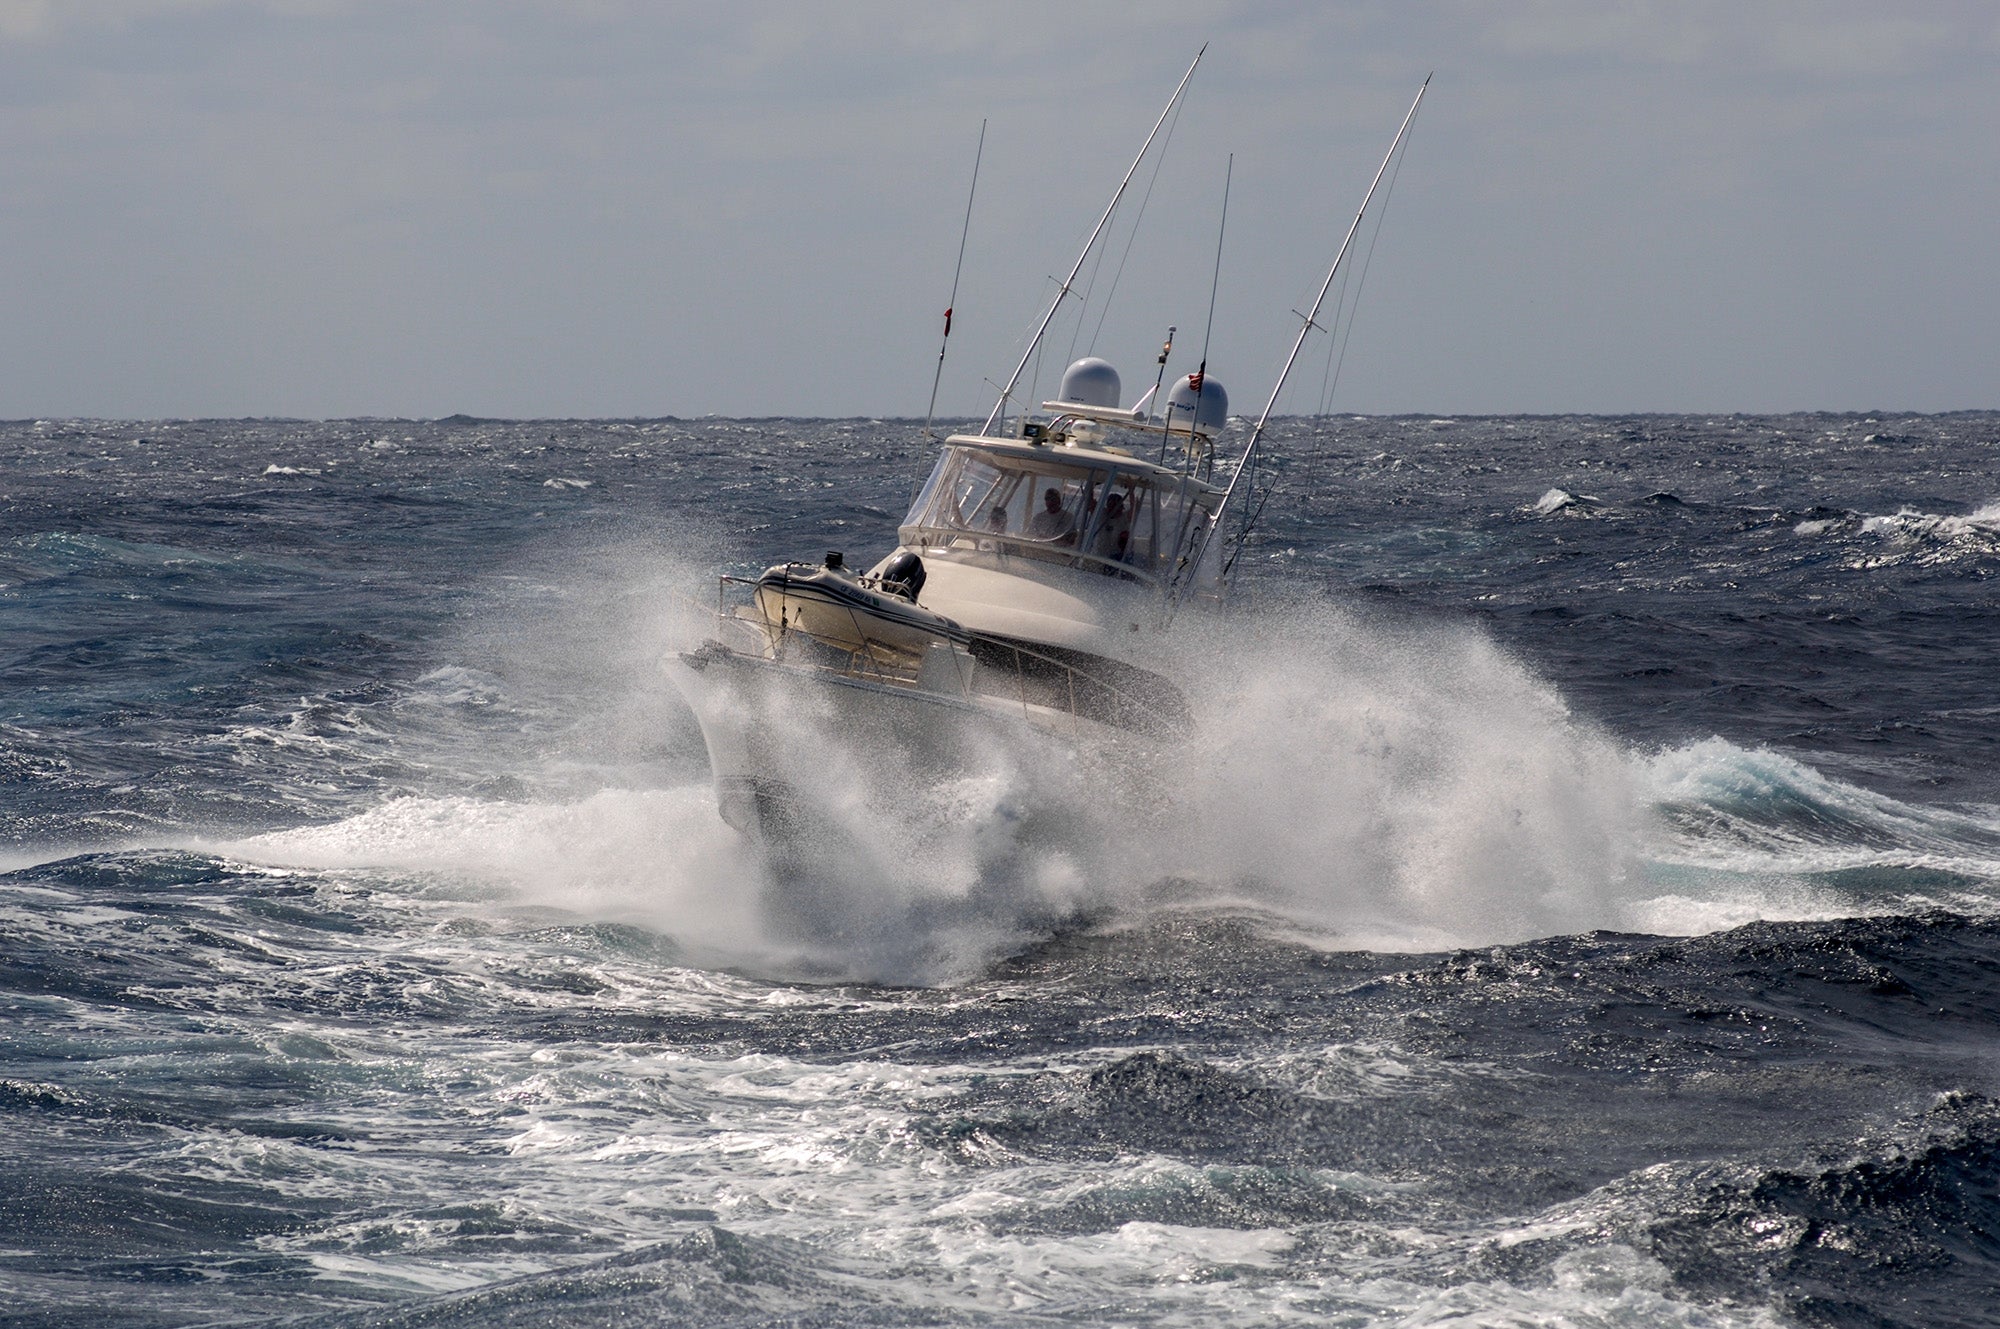 A fishing boat rescued five stranded anglers.